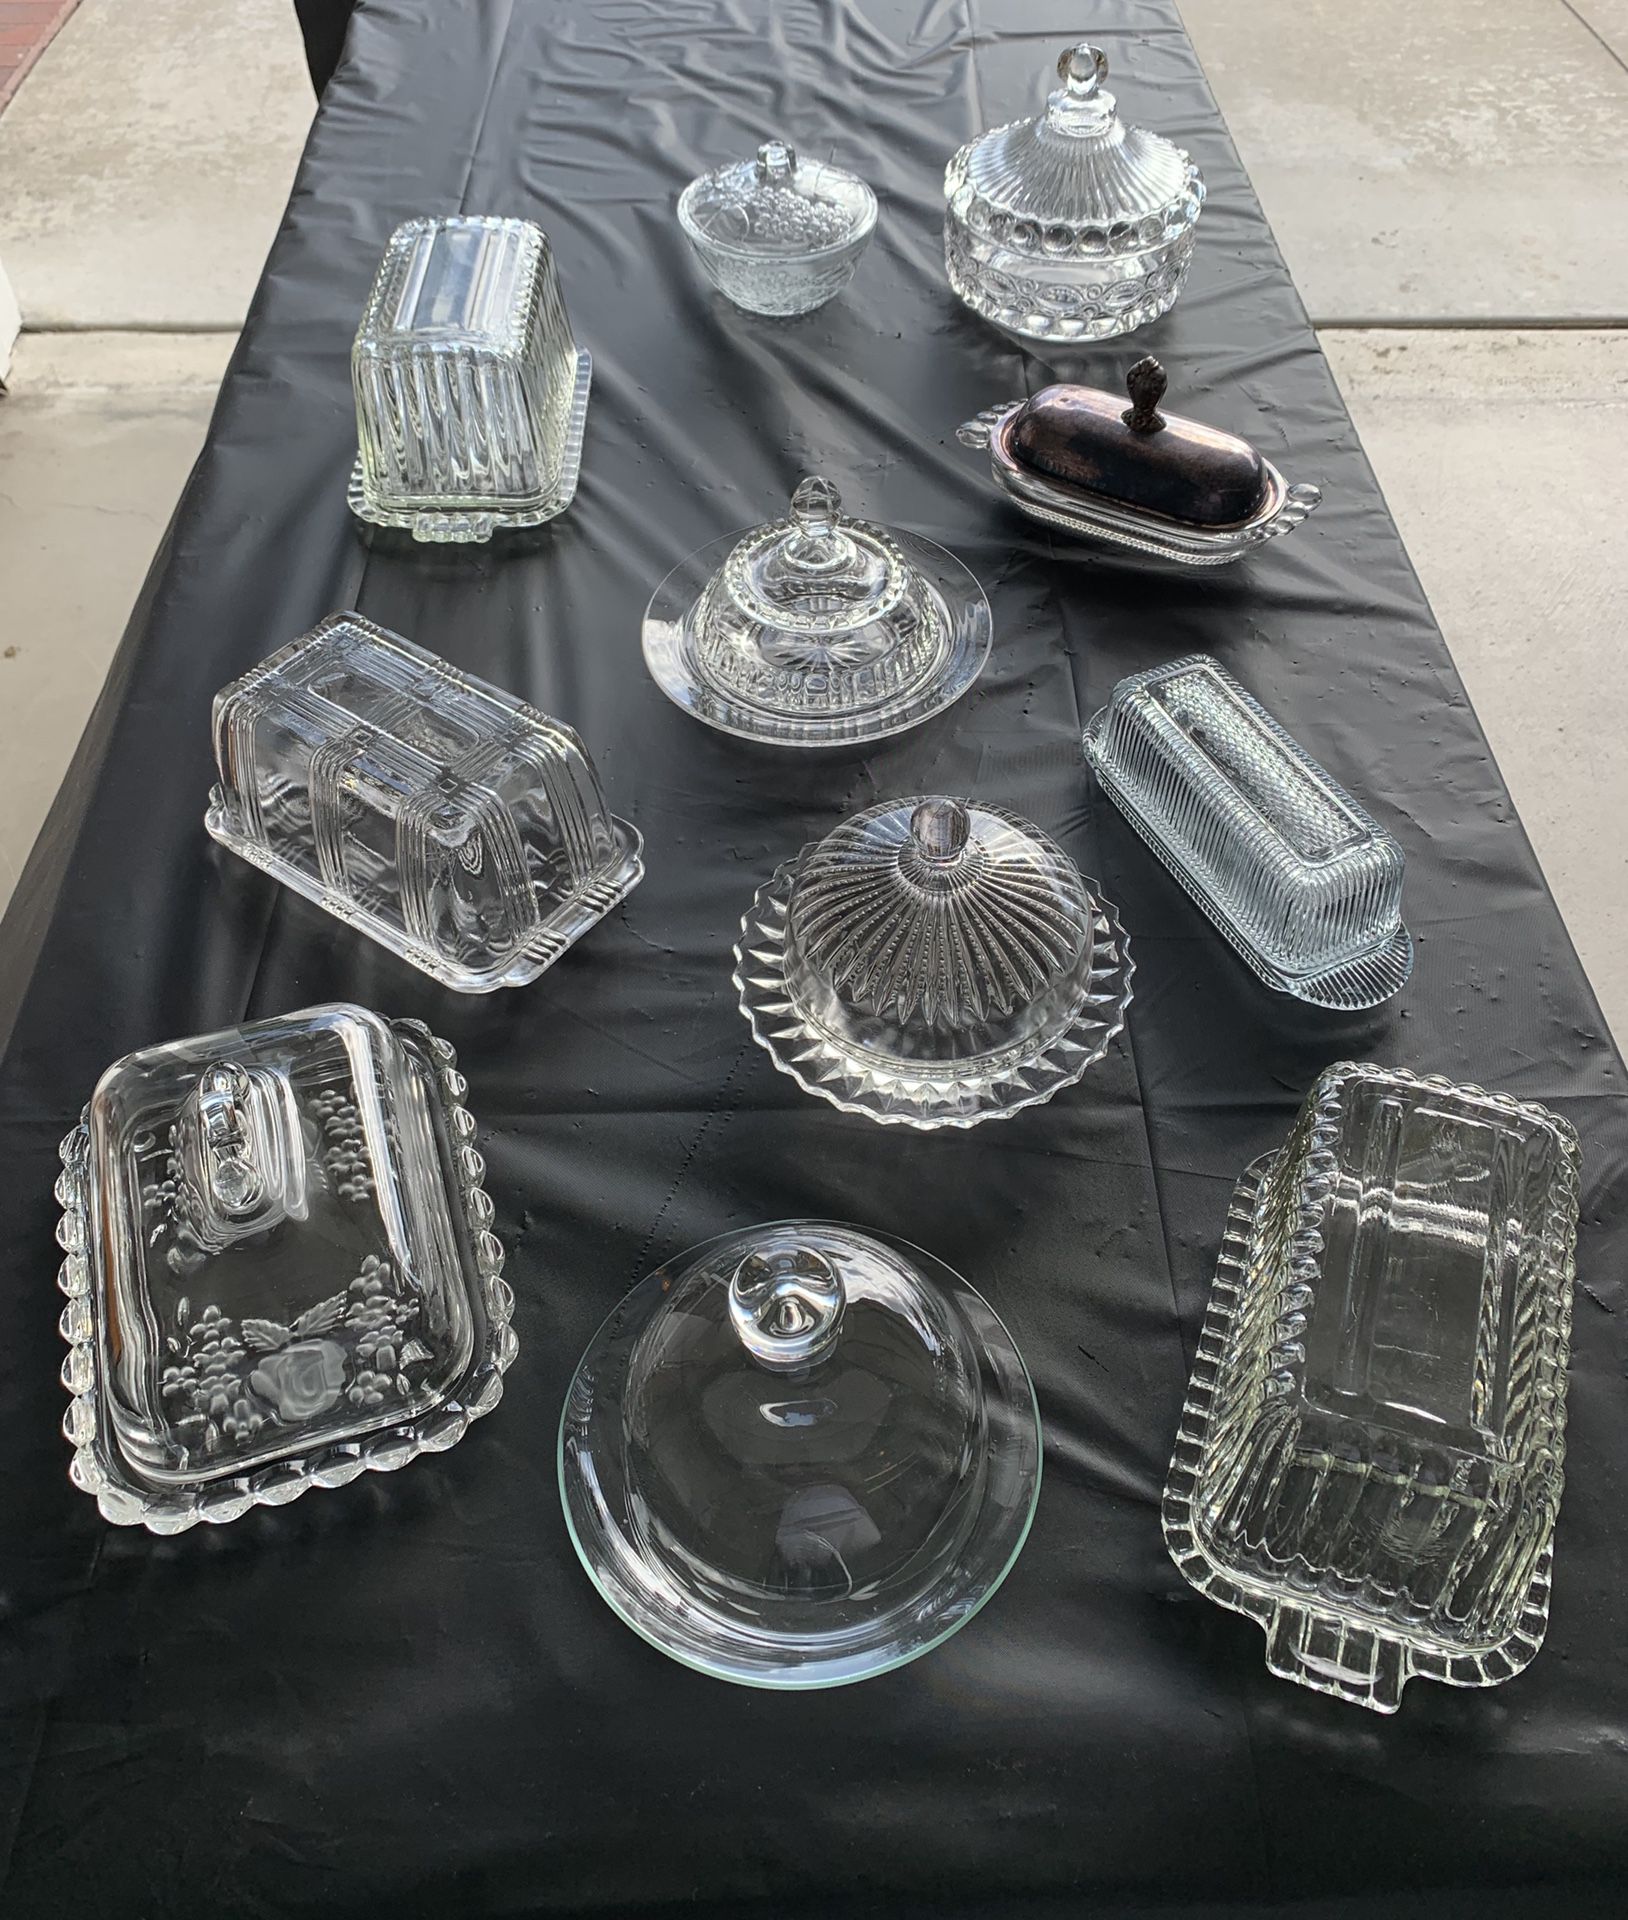 Butter dishes / candy dishes